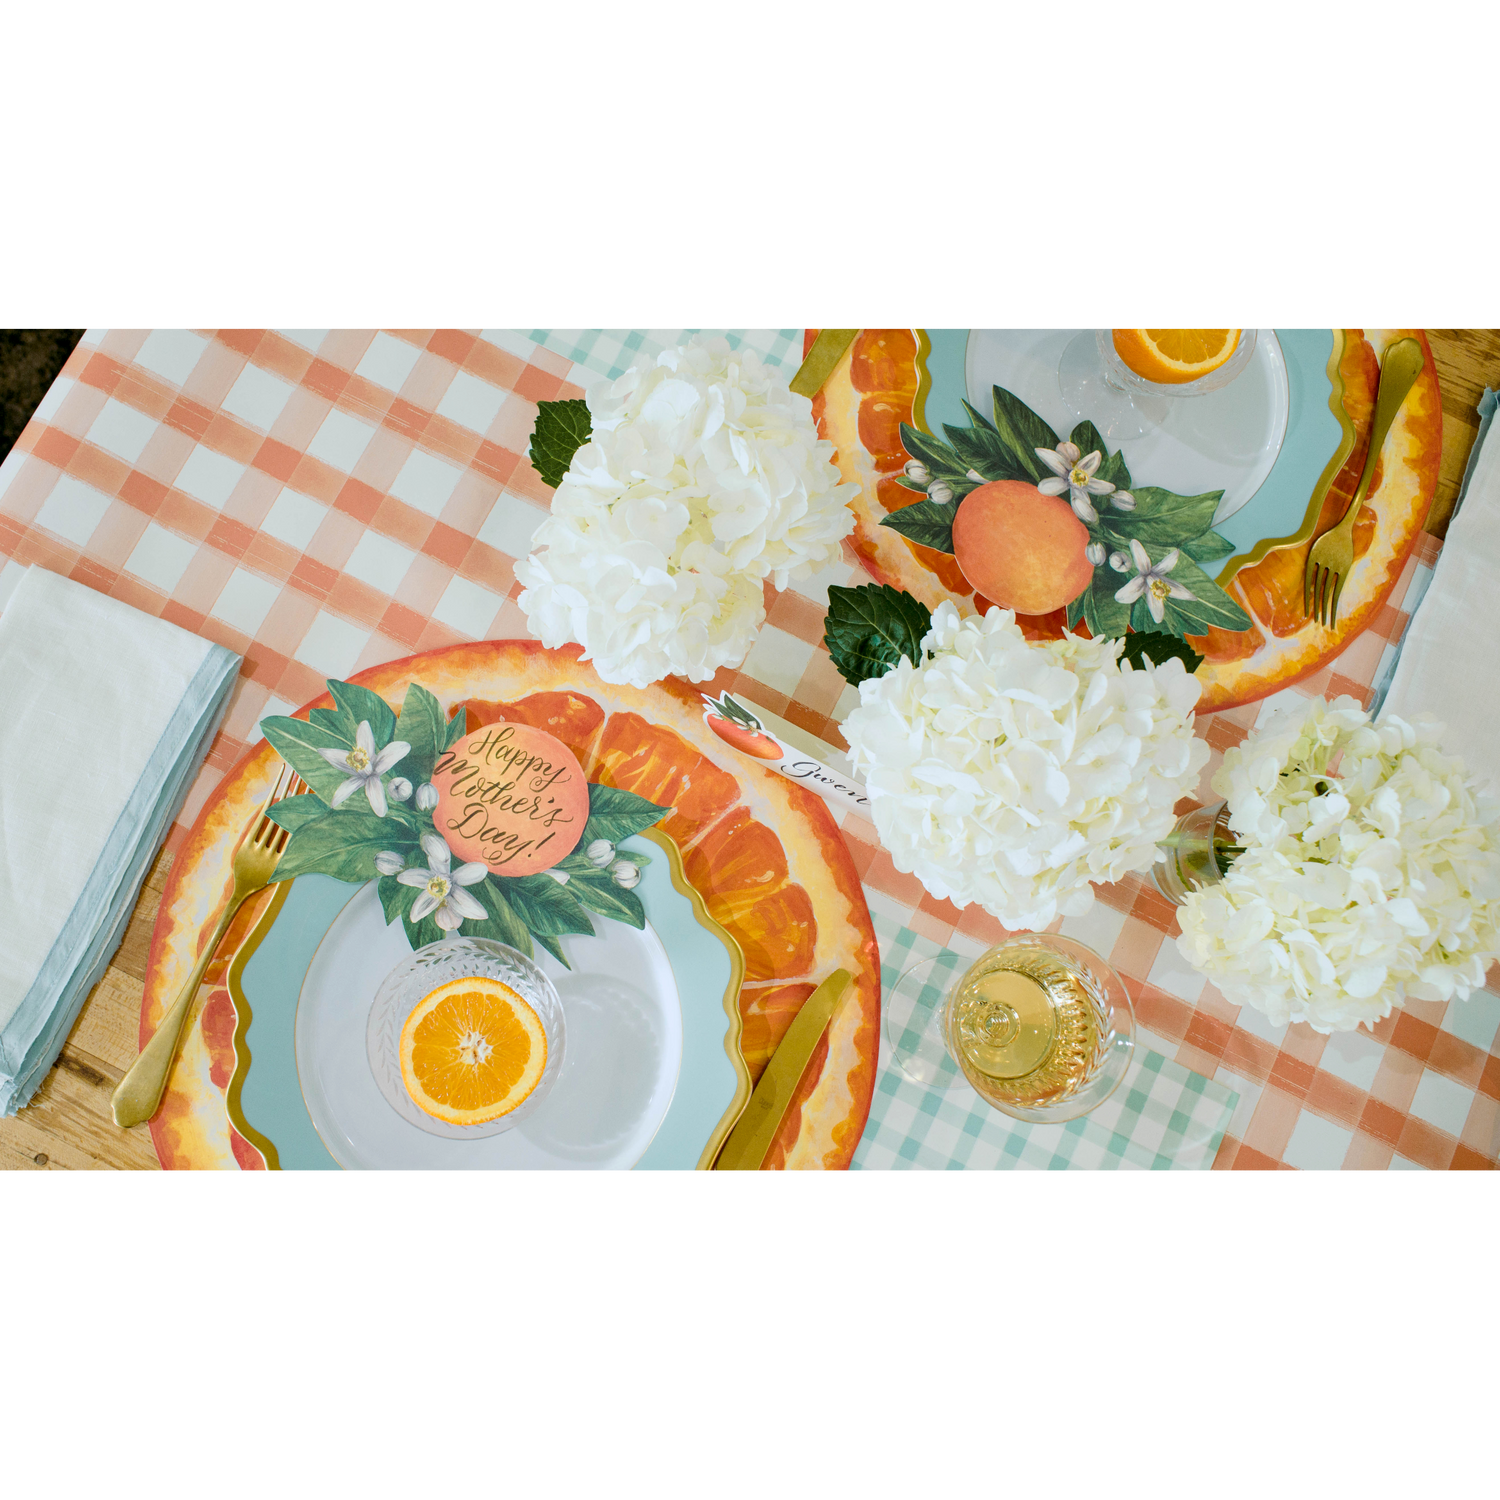 The Orange Painted Check Runner under a vibrant citrus-themed table setting, from above.